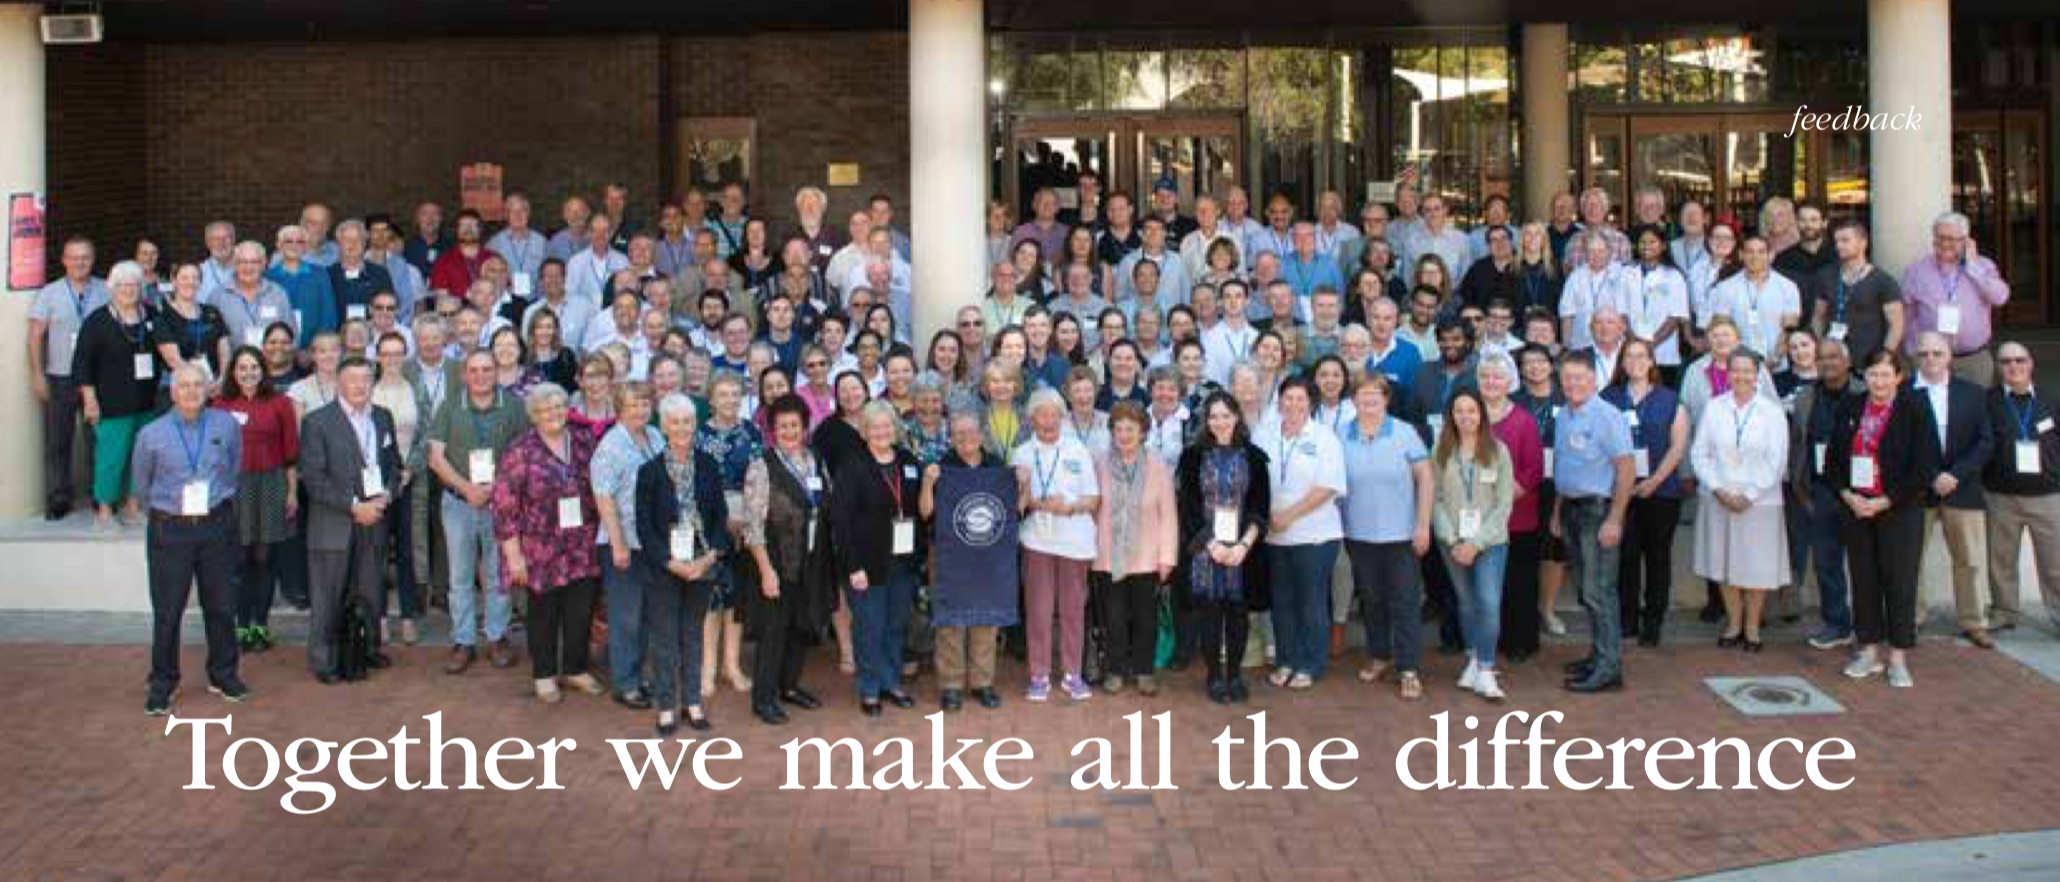 Large group of congress attendees with the text 'Together we make all the difference'.